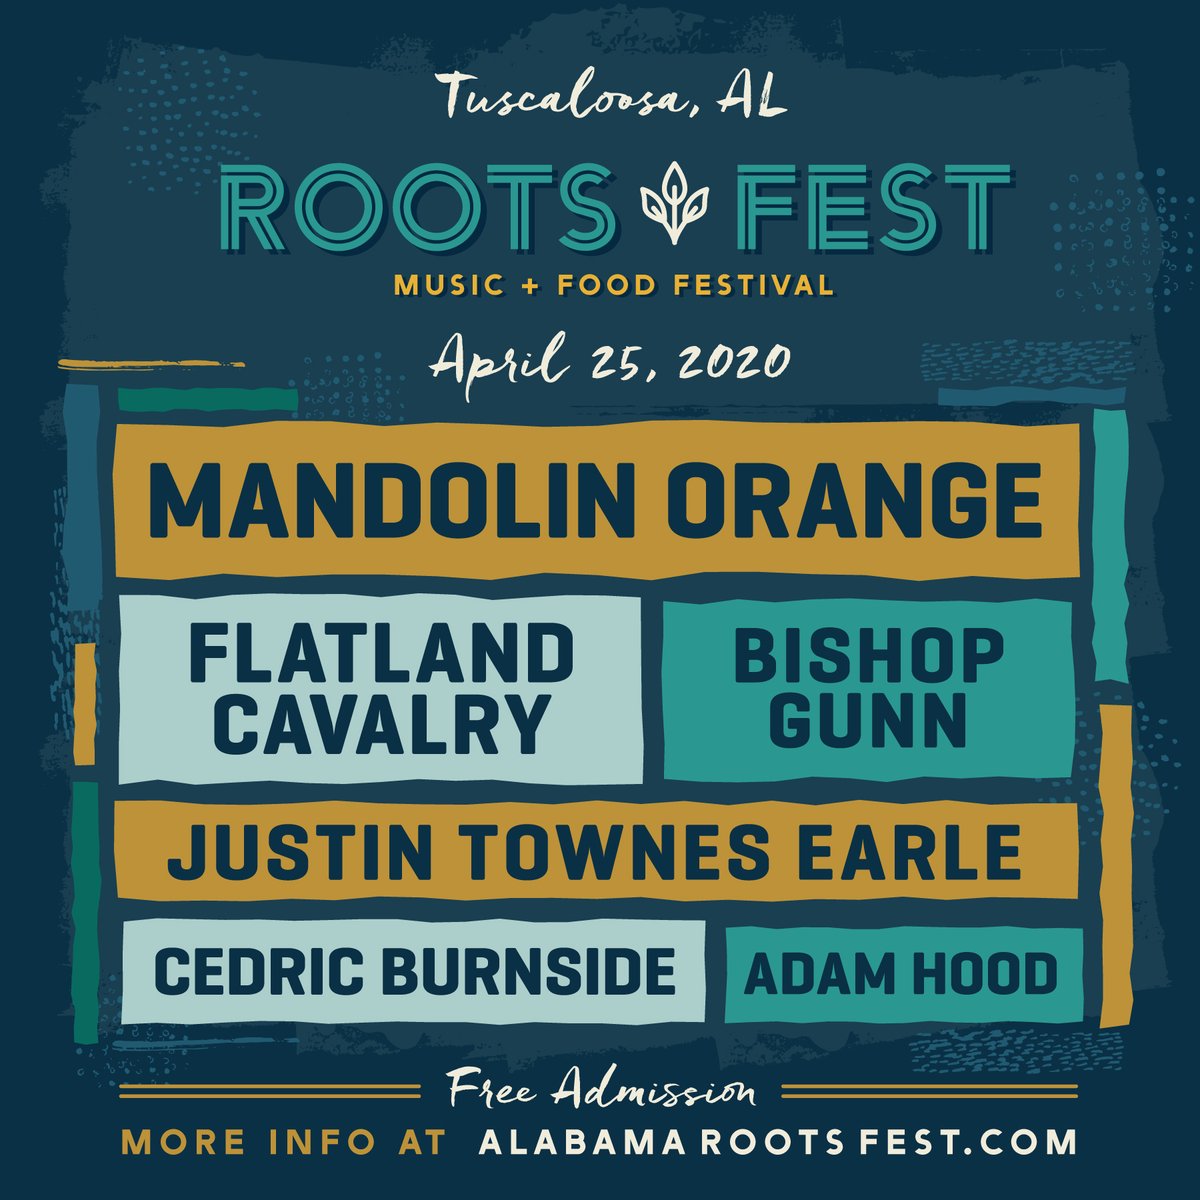 The 2020 Roots Fest lineup is here – featuring @Mandolin_Orange , @FlatlandCavalry , @bishopgunnmusic, @JustinTEarle, @CBurnside_BCR, and @adamhoodmusic in Downtown Tuscaloosa on Sat. April 25th. Free event, VIP upgrades are on sale now! Event details: bit.ly/37fPUlX